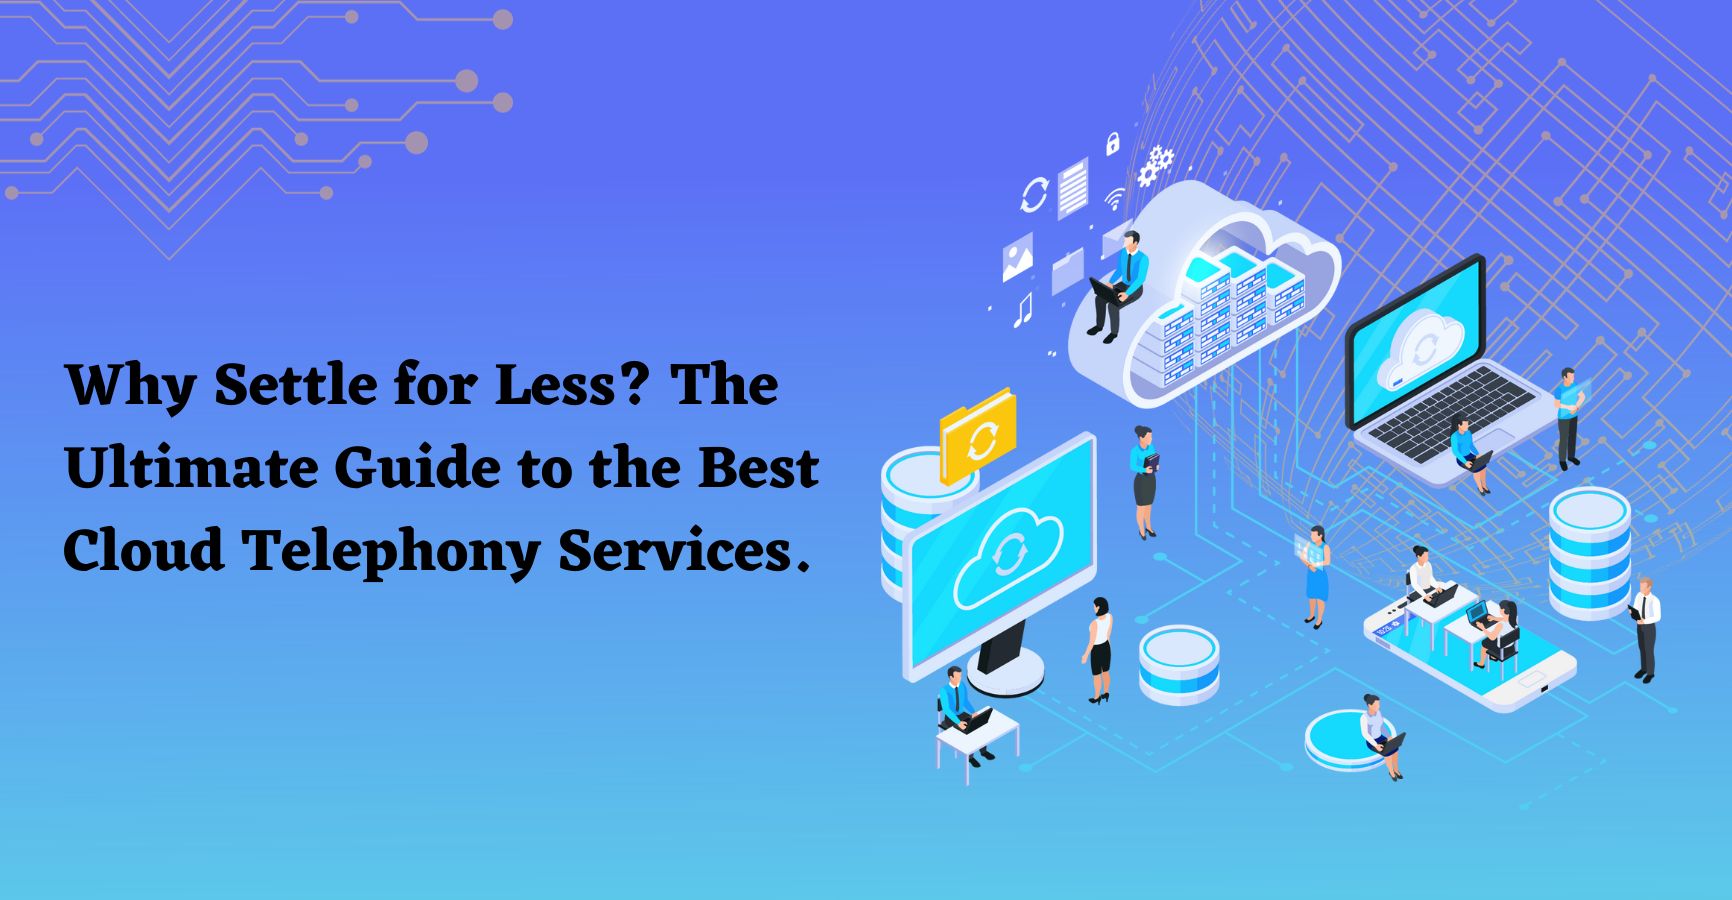 Best Cloud Telephony Services